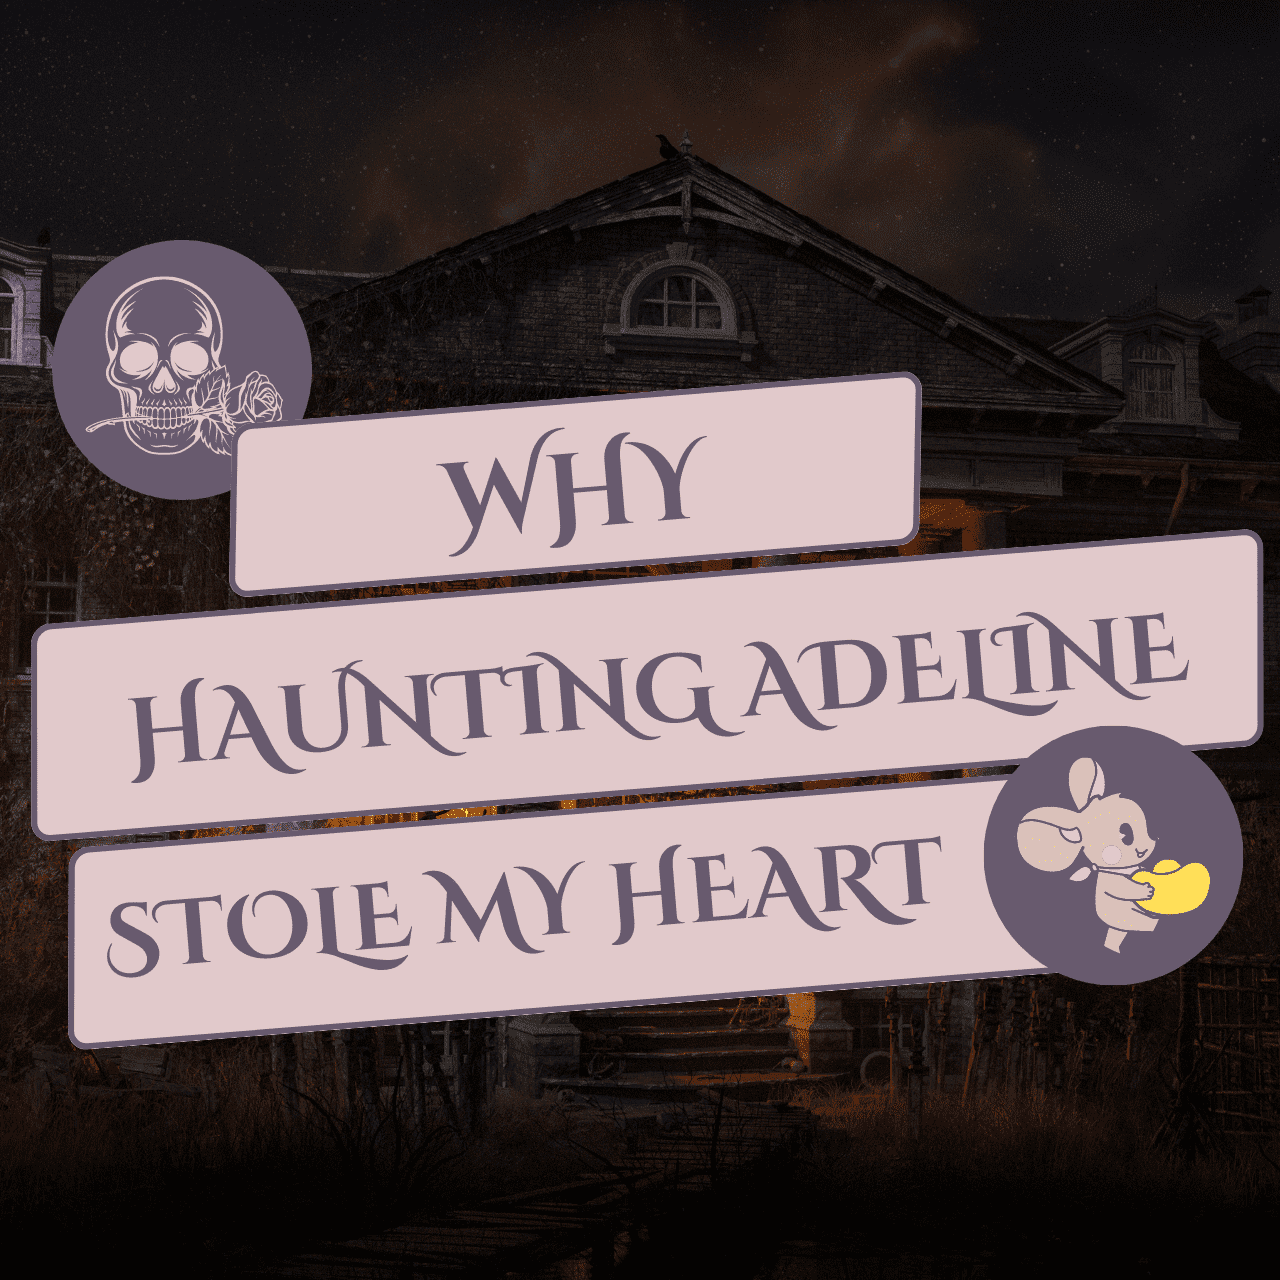 Why Haunting Adeline Stole My Heart